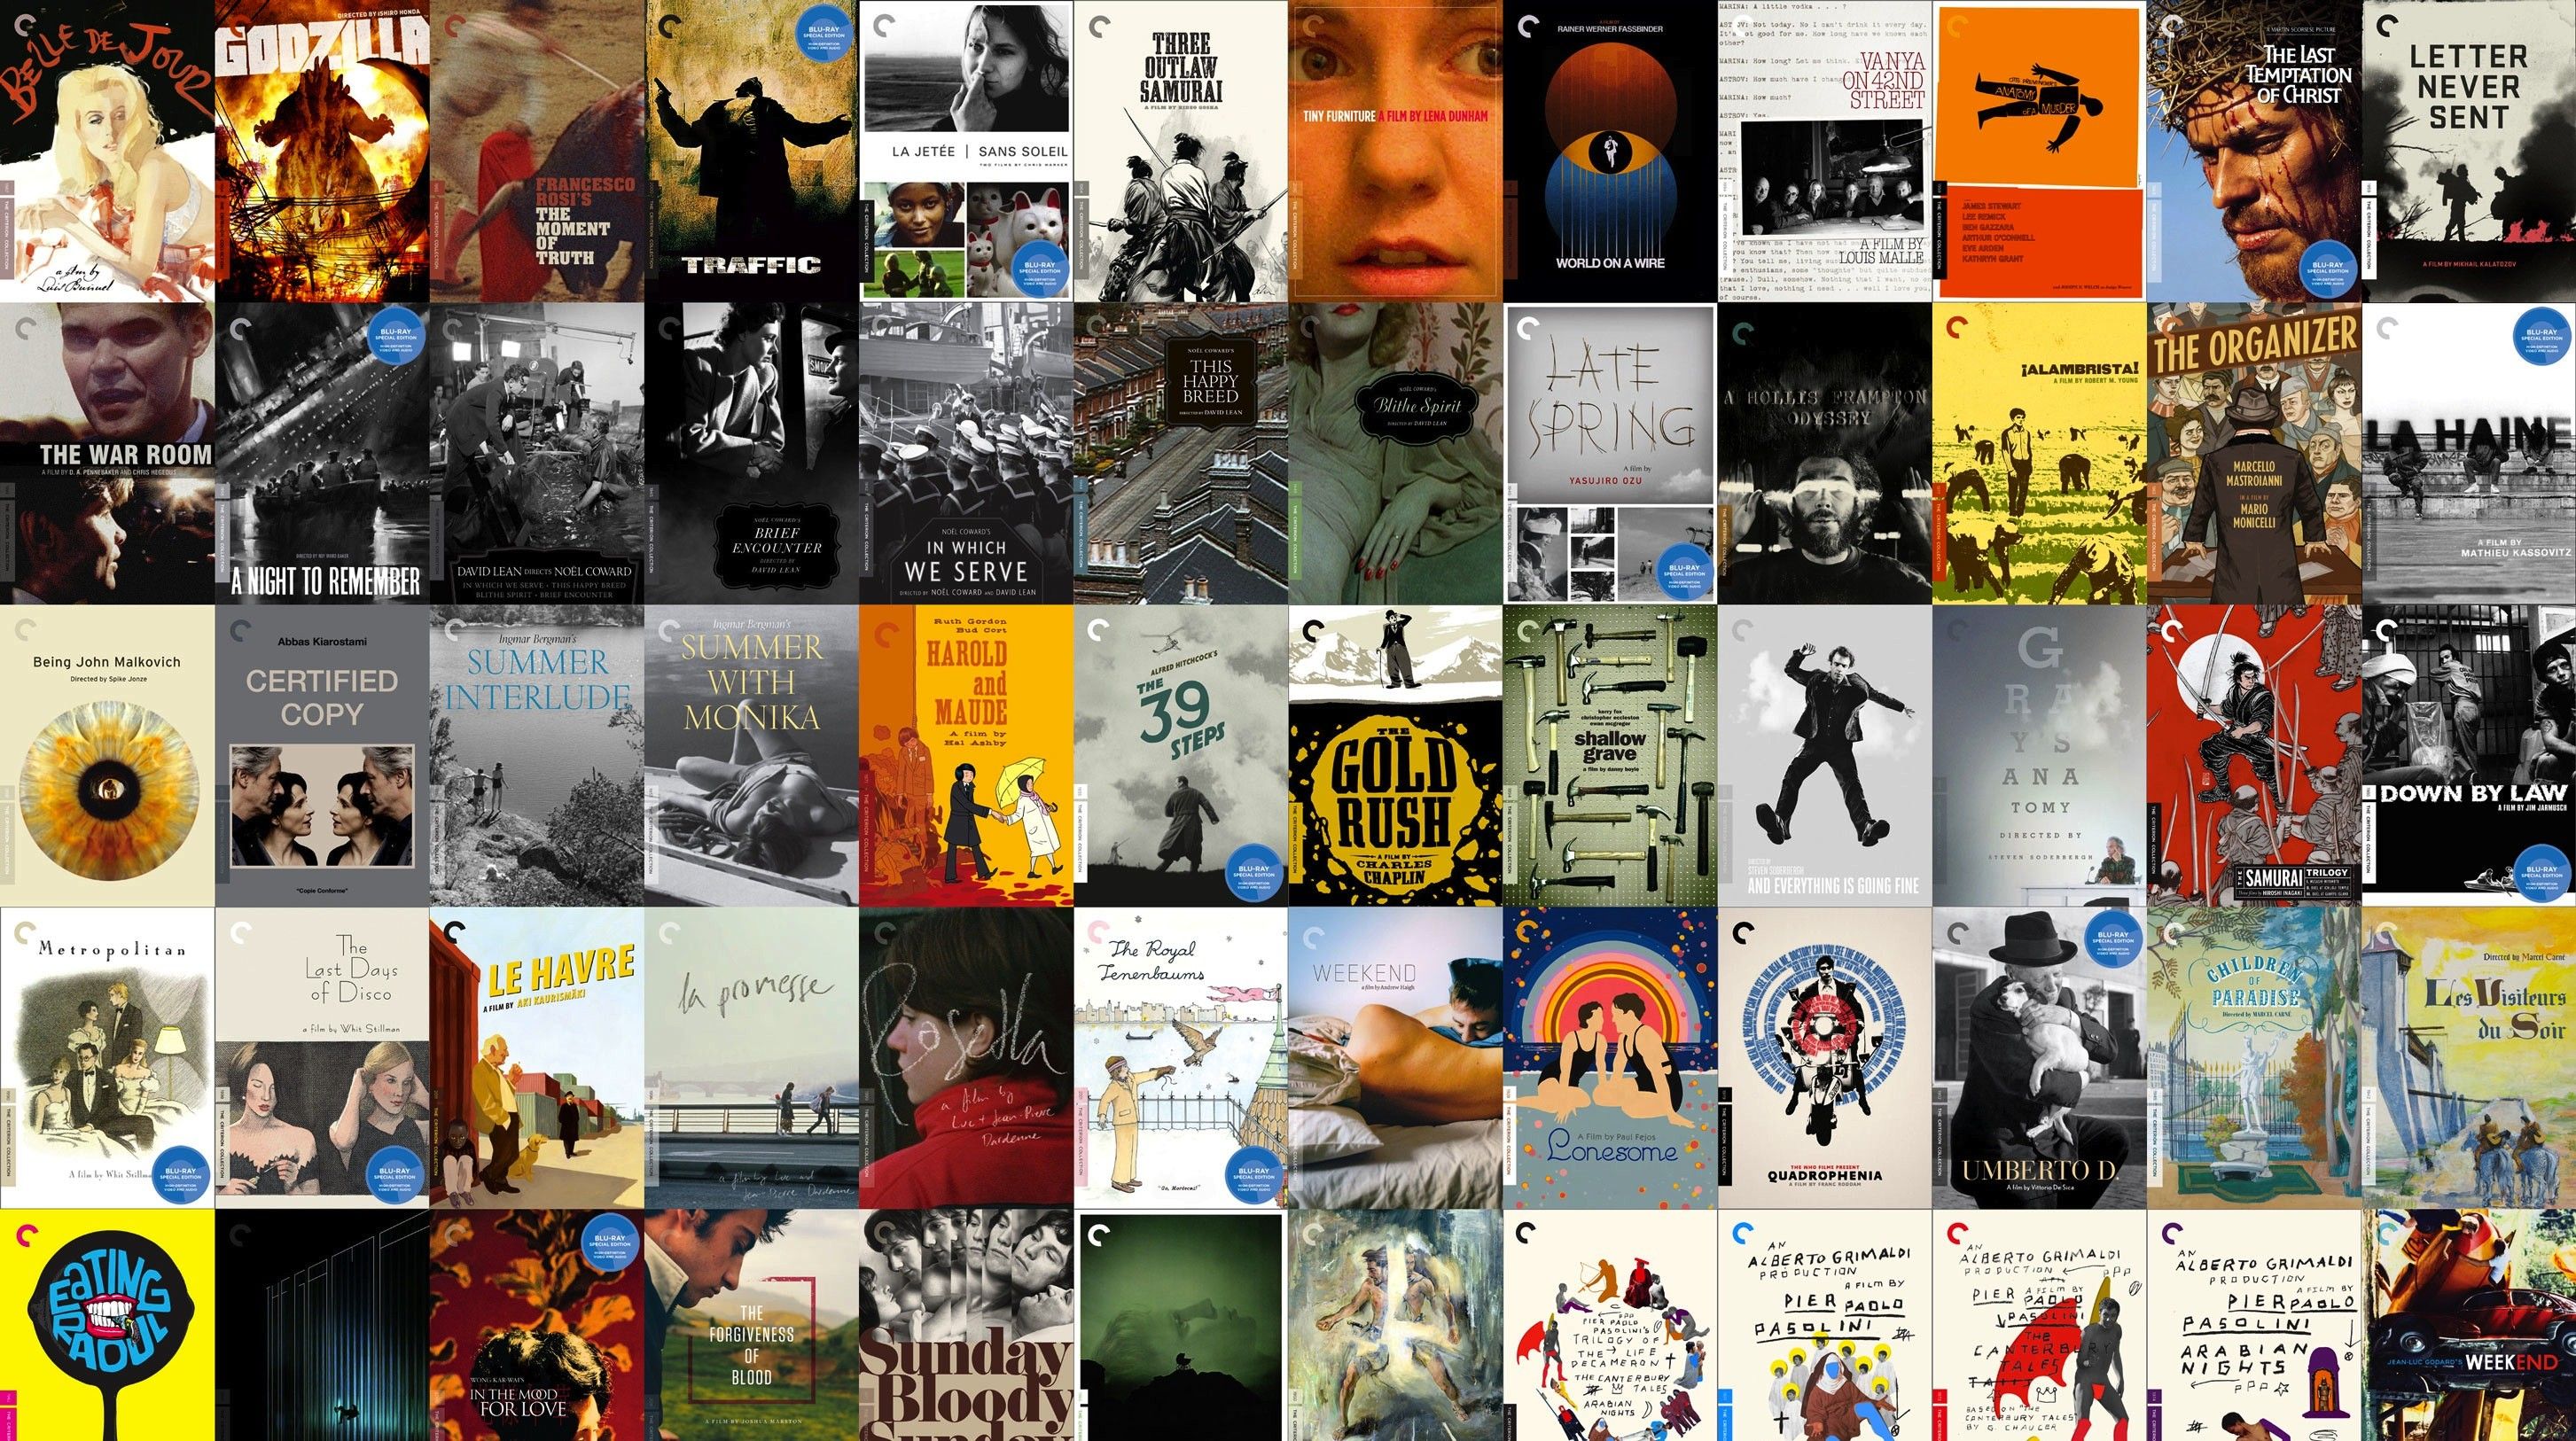 The Top 10 Criterion Films According to Today's Greatest Filmmakers